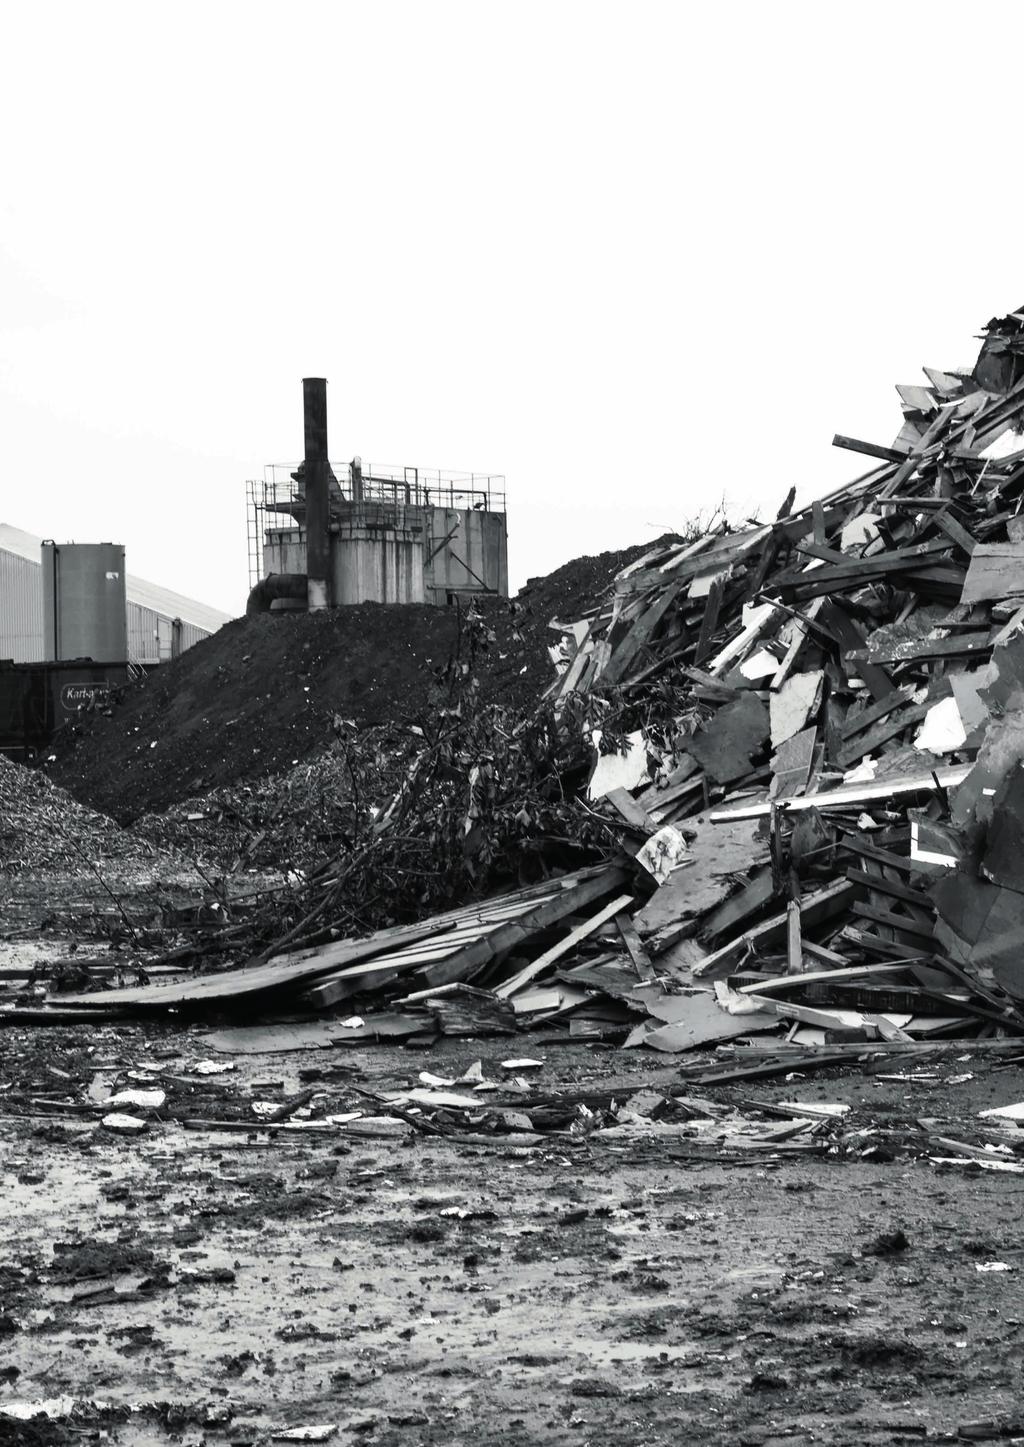 Industry Specific Solutions At Fireward we pride ourselves in the provision of bespoke solutions developed from an extensive knowledge of the waste and processing industry.